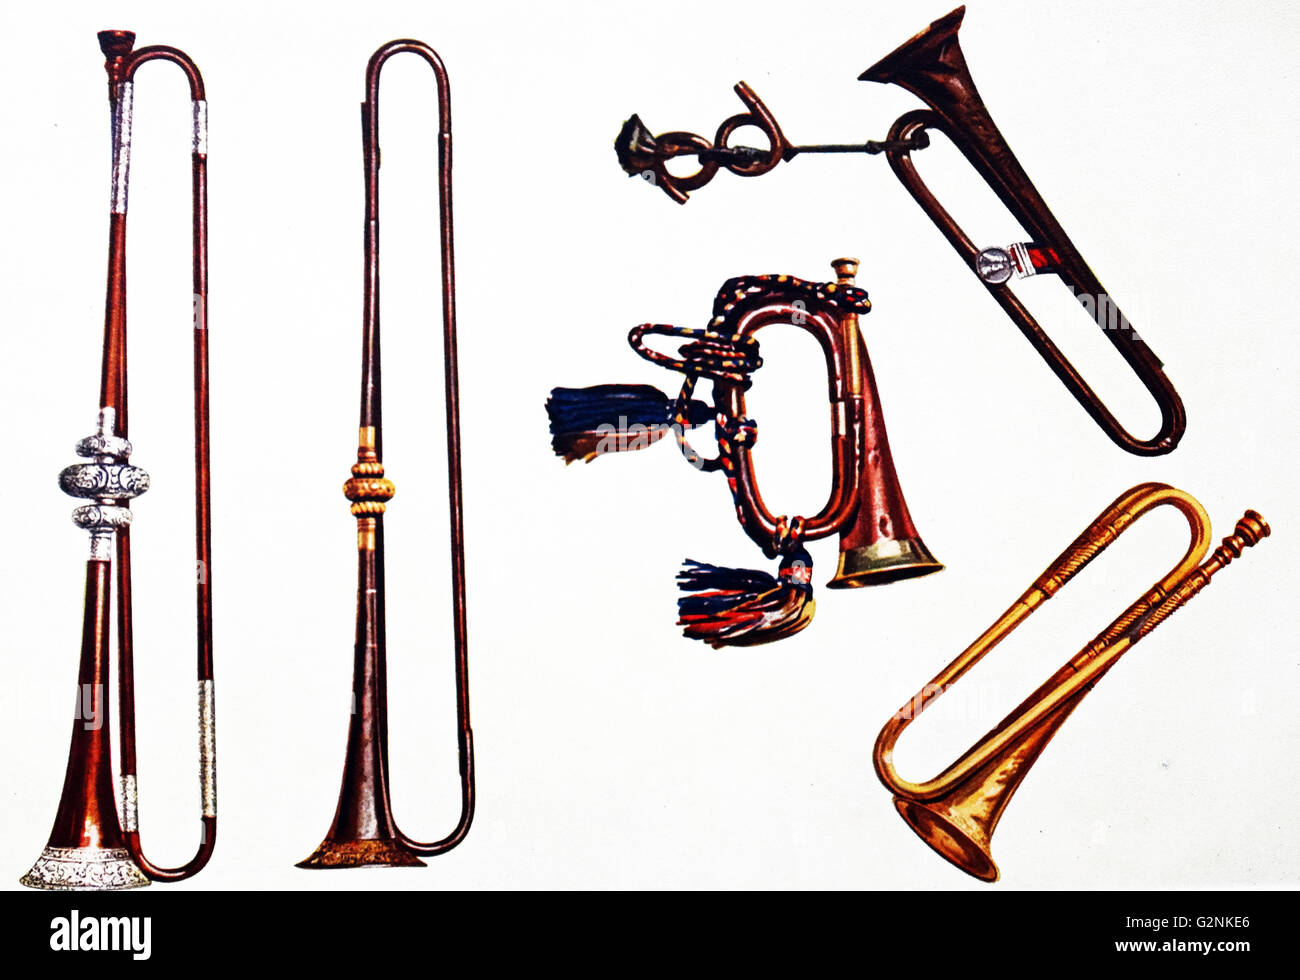 Cavalry Bugle (with tassels), Cavalry Trumpet (embossed) and Trumpets. Three instruments with crooks, gilt and silver mounted. Some of the instruments were carried in the British Army. Stock Photo